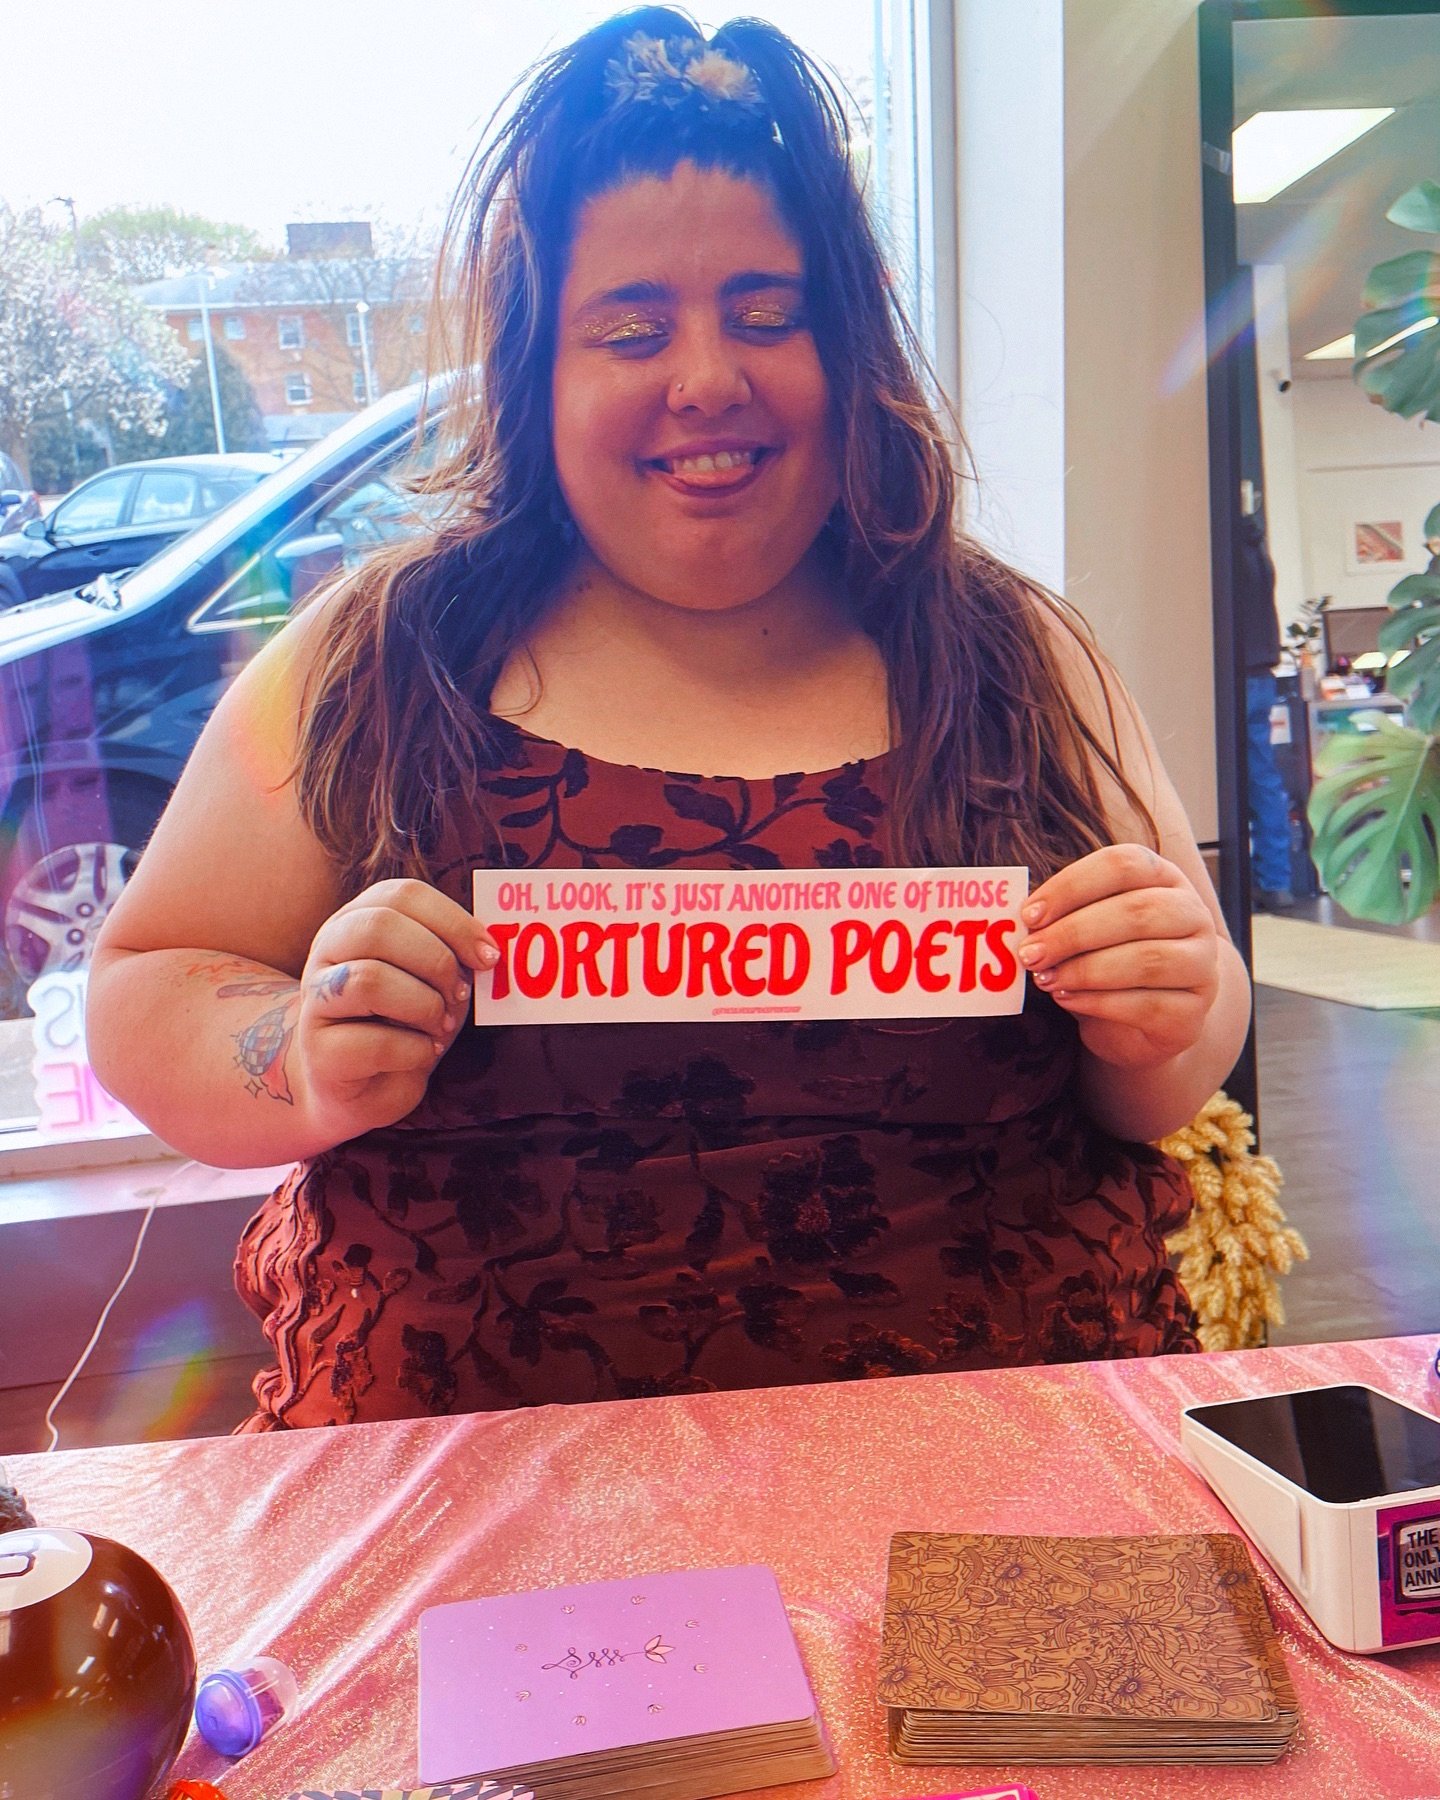 💖PREORDER FROM THIS TORTURED POET💖

I&rsquo;m listening to my latest draft of &ldquo;Diary of a Little Spoon&rdquo; on my way to this tarot party &amp; y&rsquo;all, not gonna lie, she&rsquo;s gonna be good. 📓🌈💕 This is my experimental prose poet